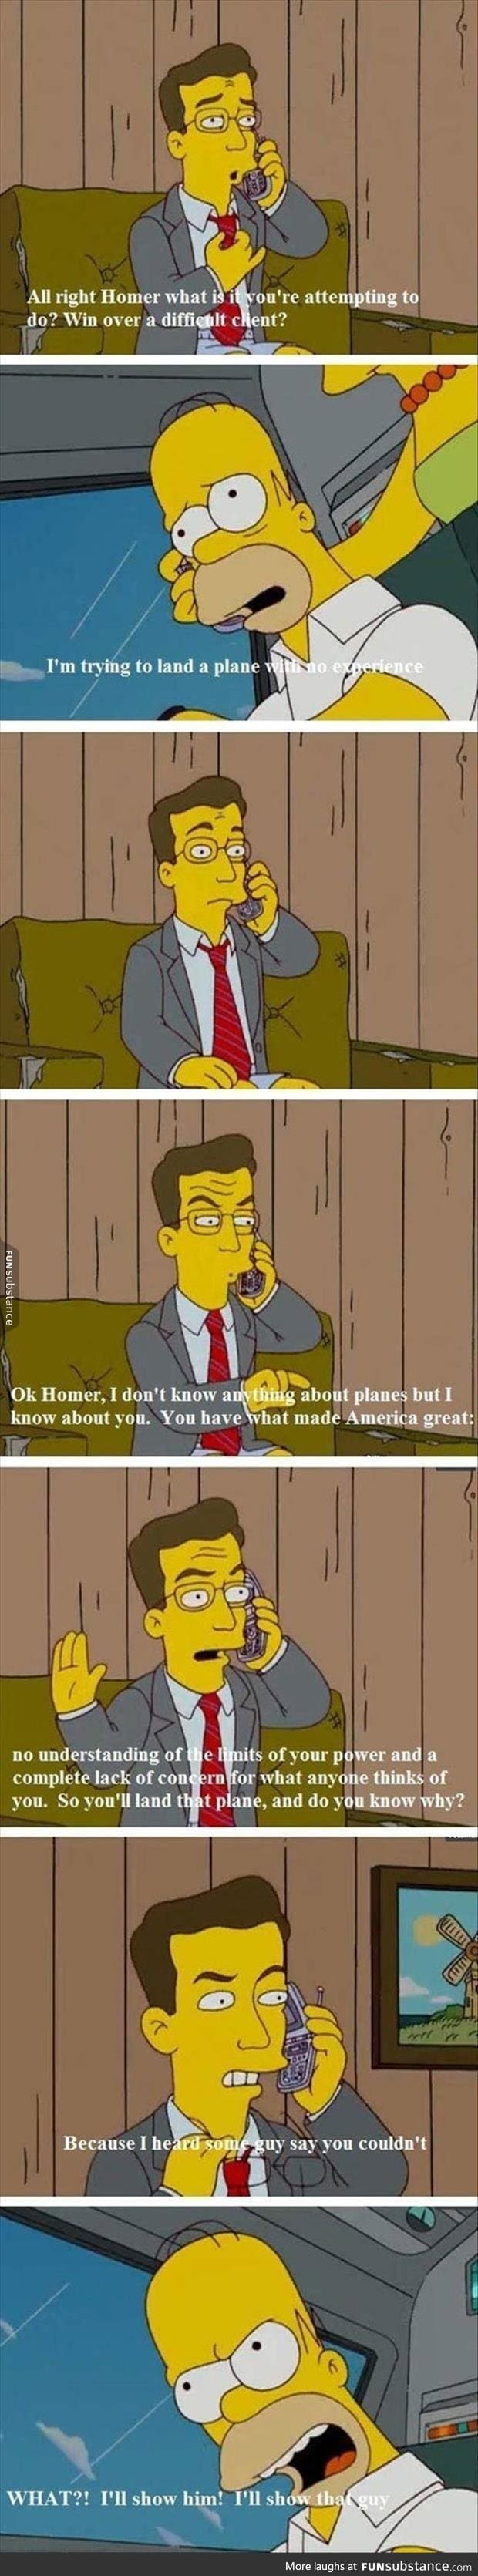 Homer is the man